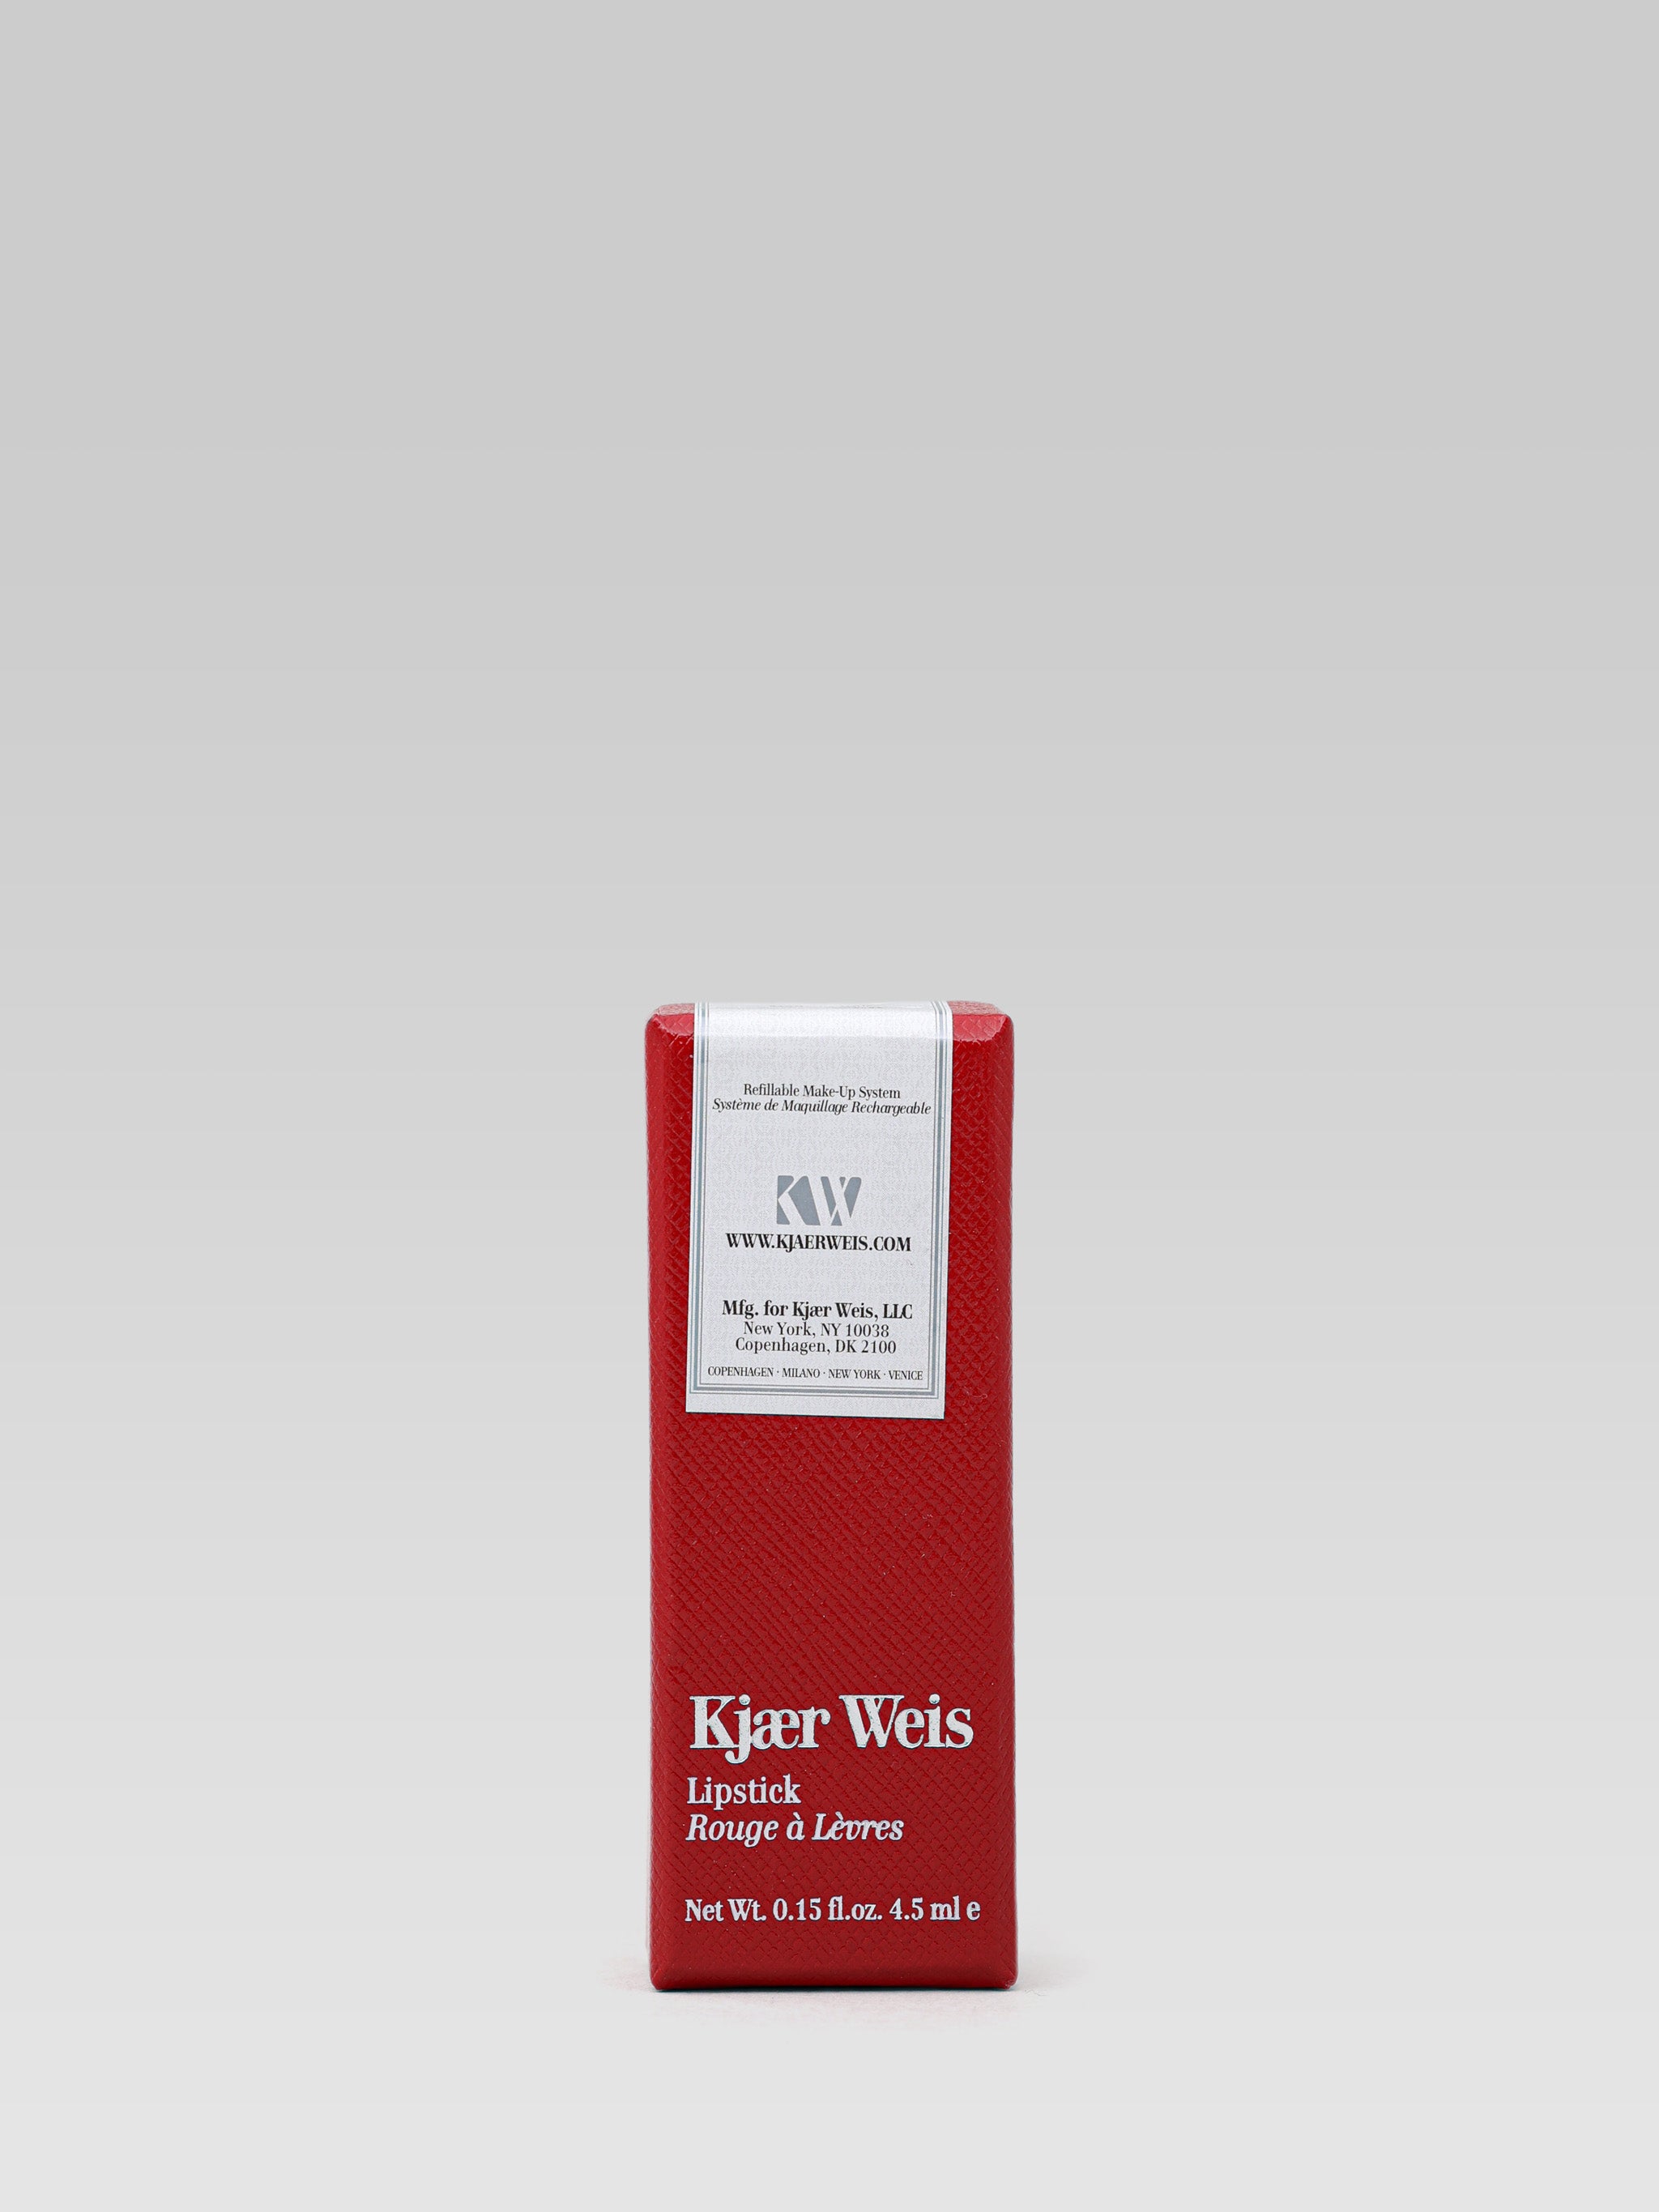 Kjaer Weis Lipstick red edition product packaging 